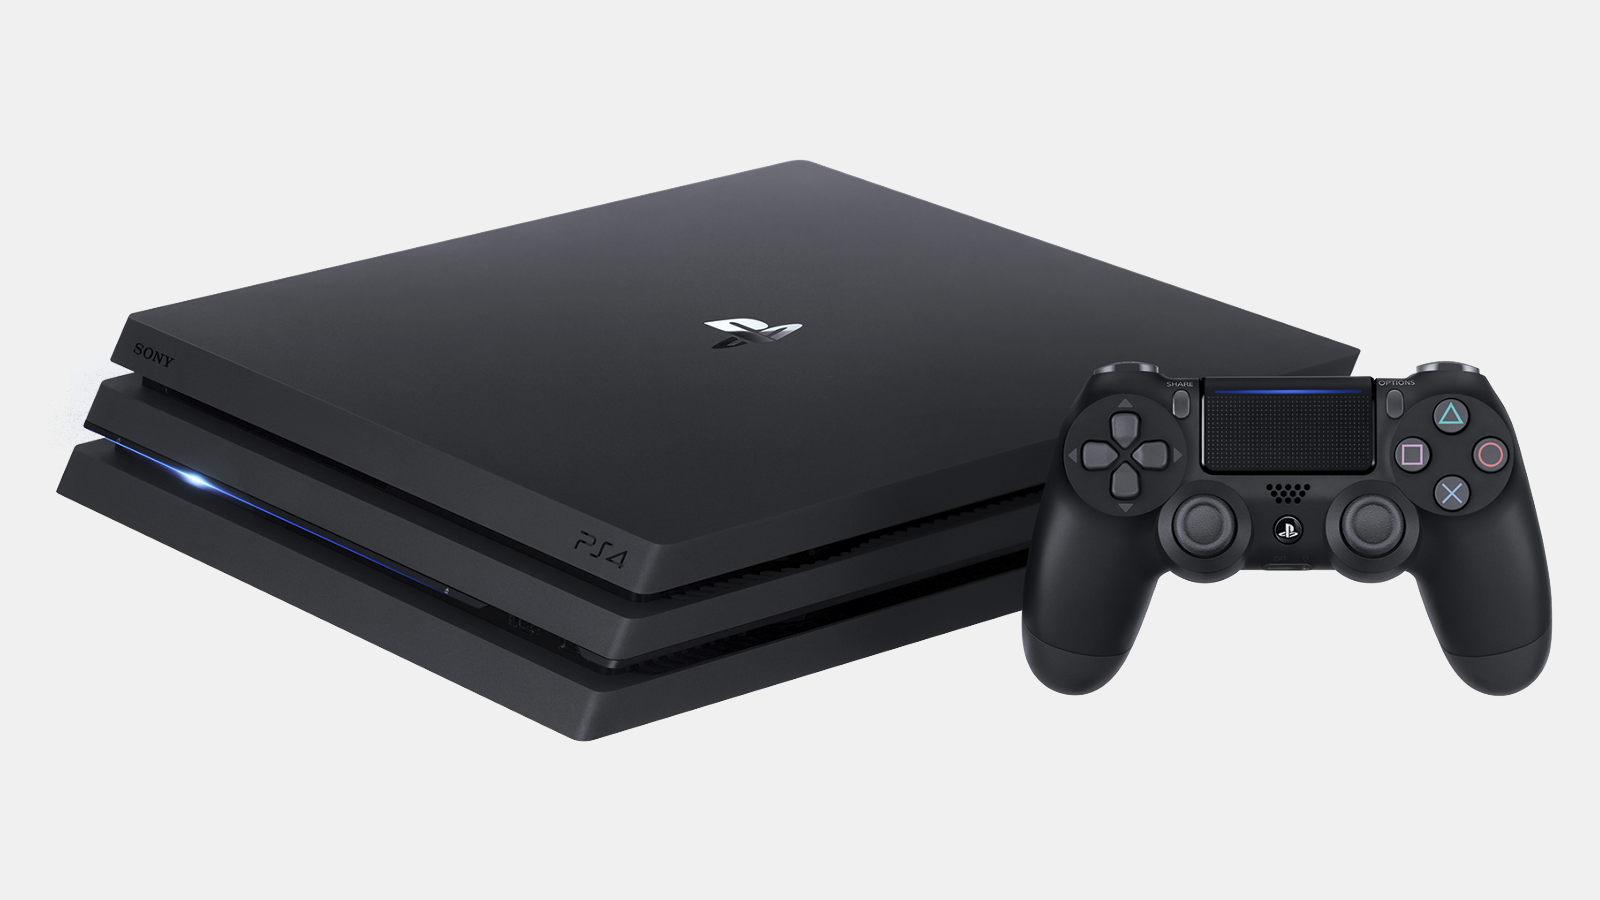 New PS5: Sony Launches Slimmer PlayStation 5 With Detachable Disc Drive -  Bloomberg